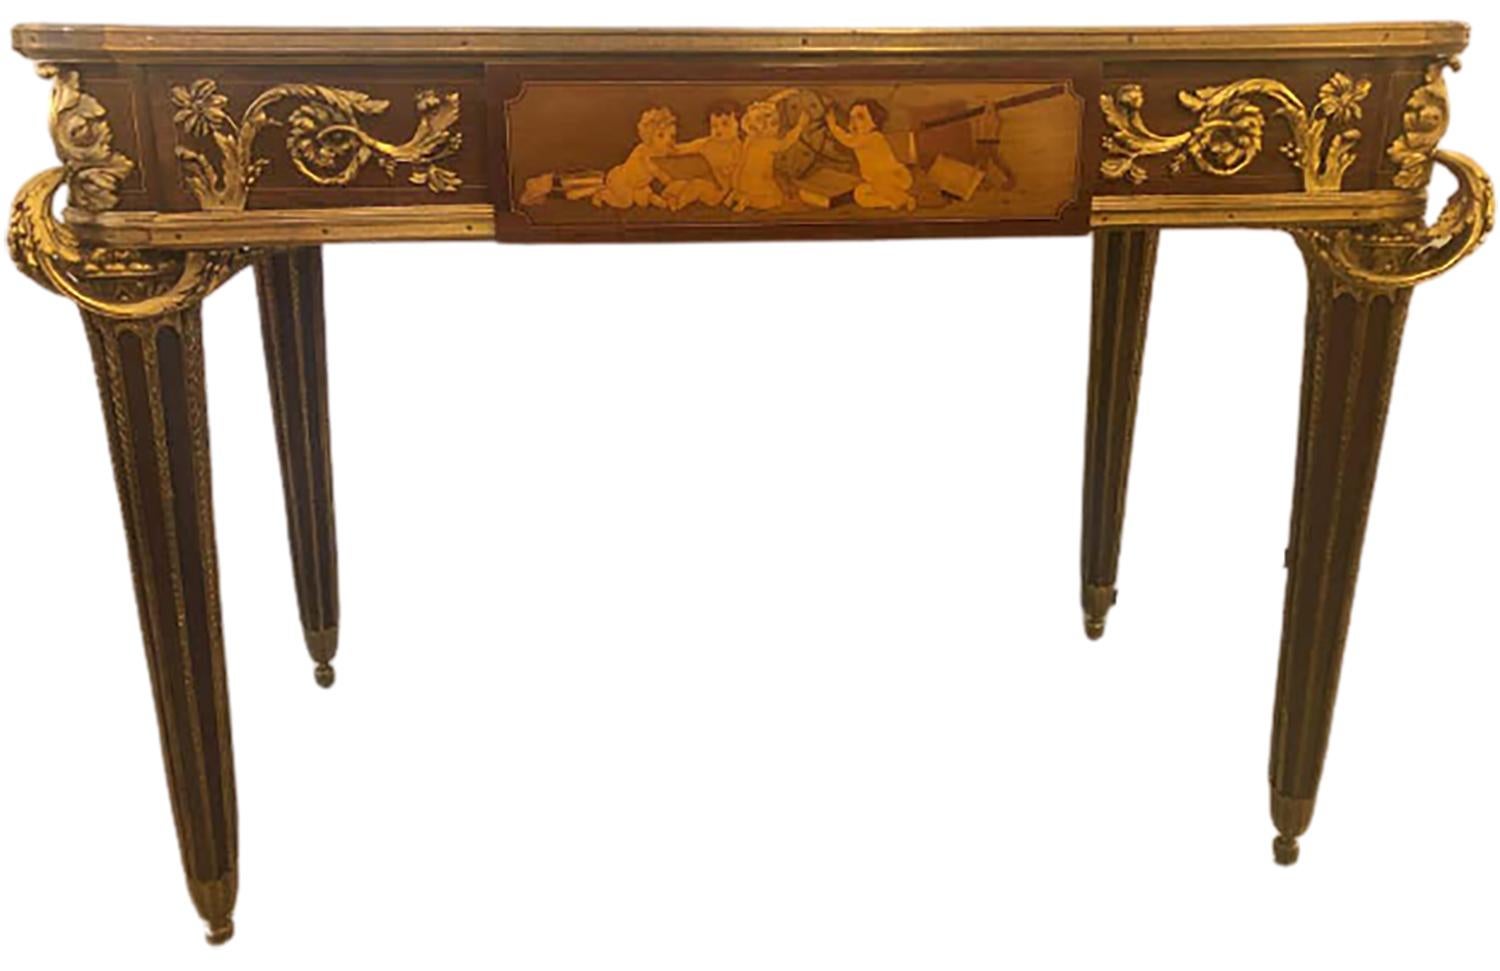 A fine and rare Louis XVI style table de salon, attributed to Francois Linke. A fine quality table with exquisite bronze mounts along with detailed marquetry inlay, featuring one single push button spring released drawer, signed F.